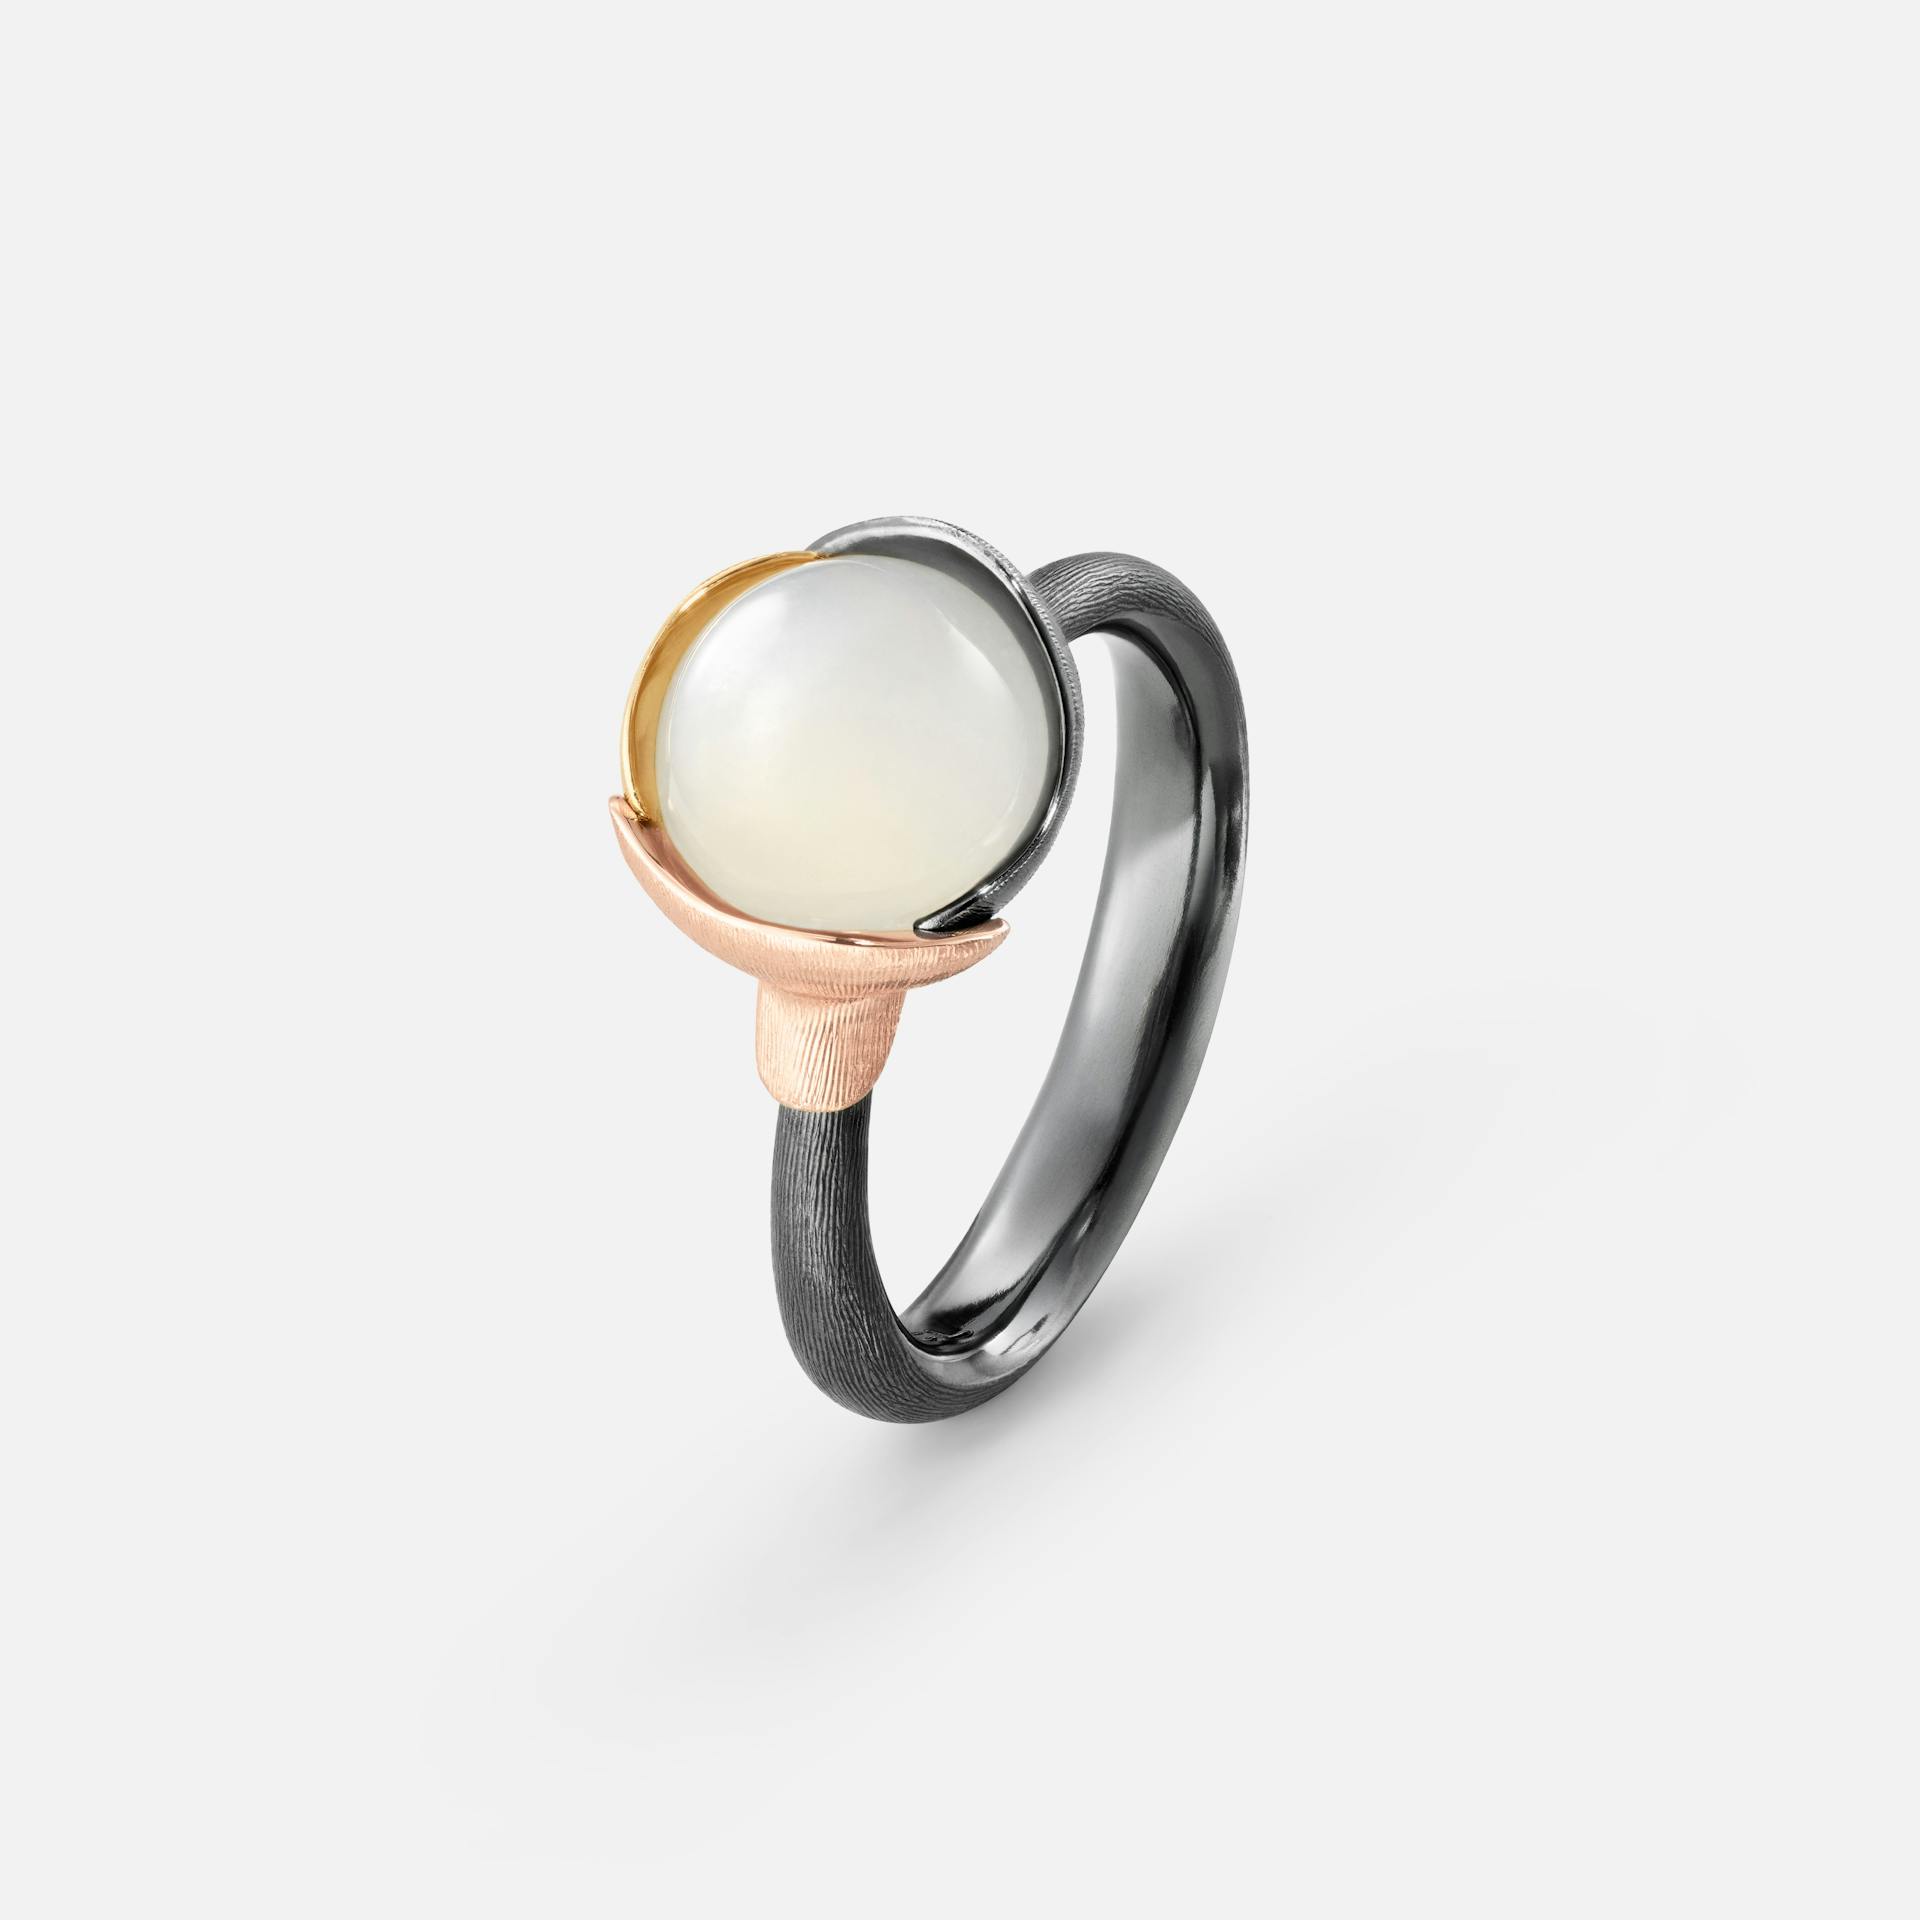 Lotus Ring size 1 in Gold & Oxidized Sterling Silver with White Moonstone  |  Ole Lynggaard Copenhagen